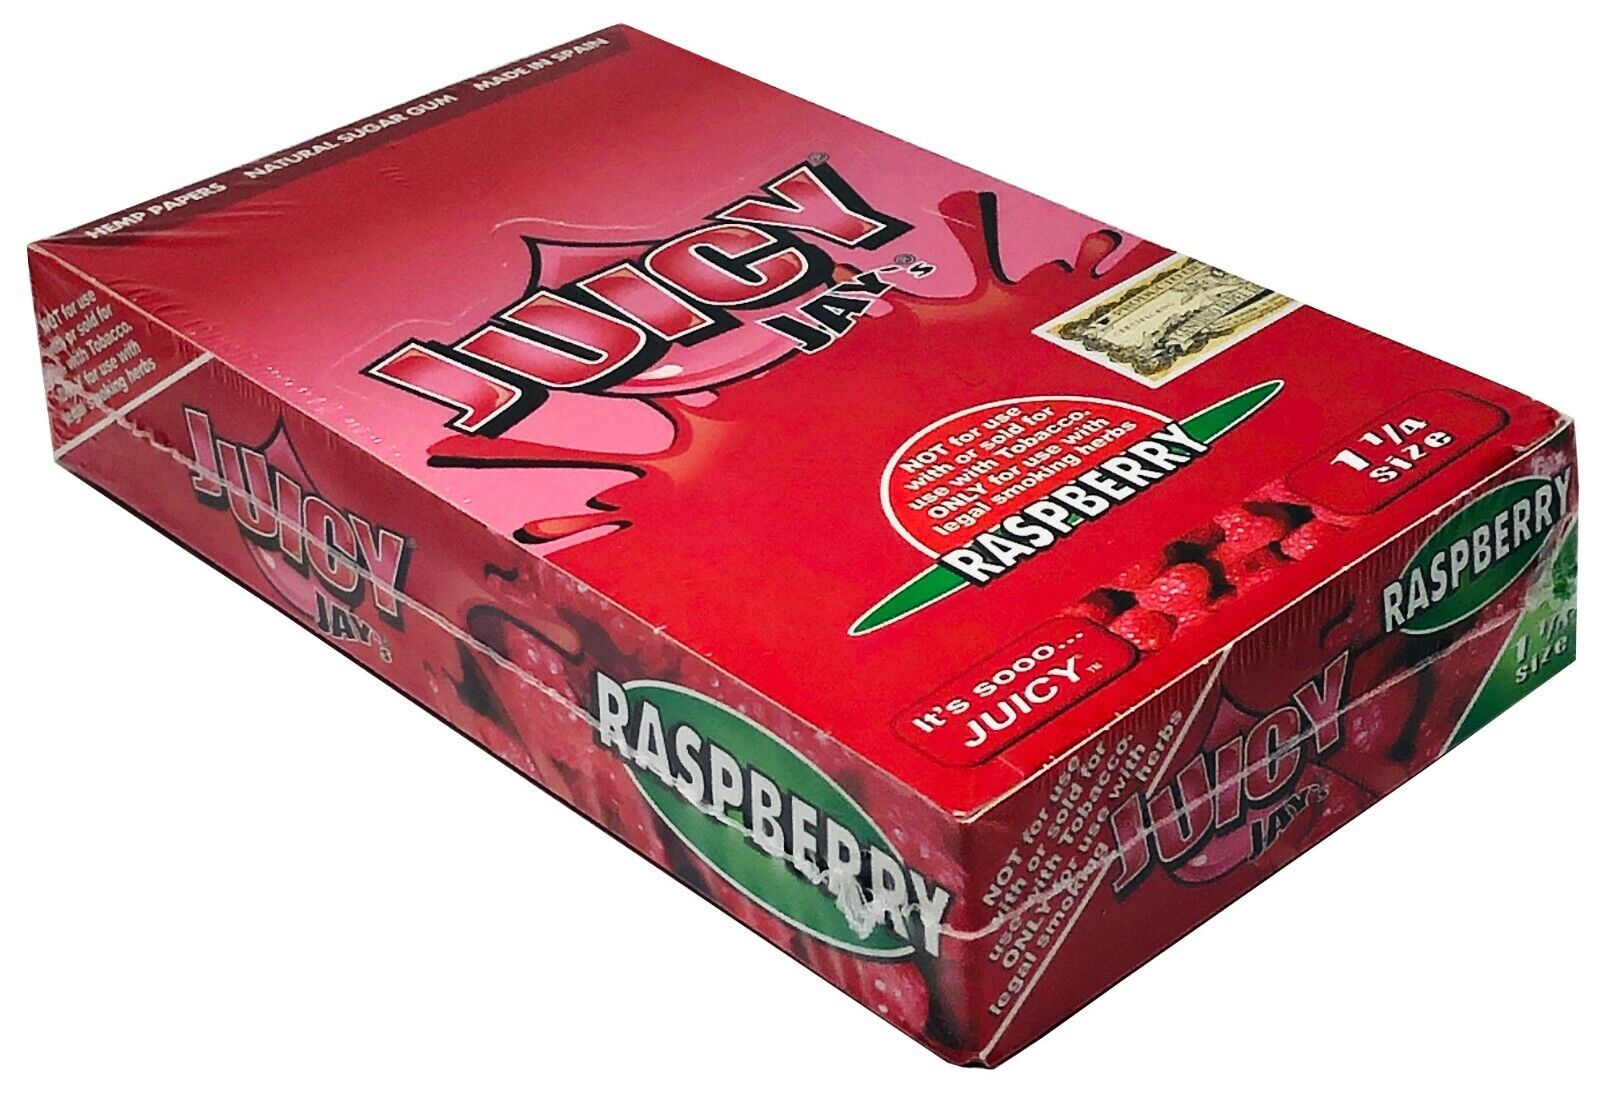 Juicy Jay's Raspberry Flavored Rolling Papers 1.25 Box of 24